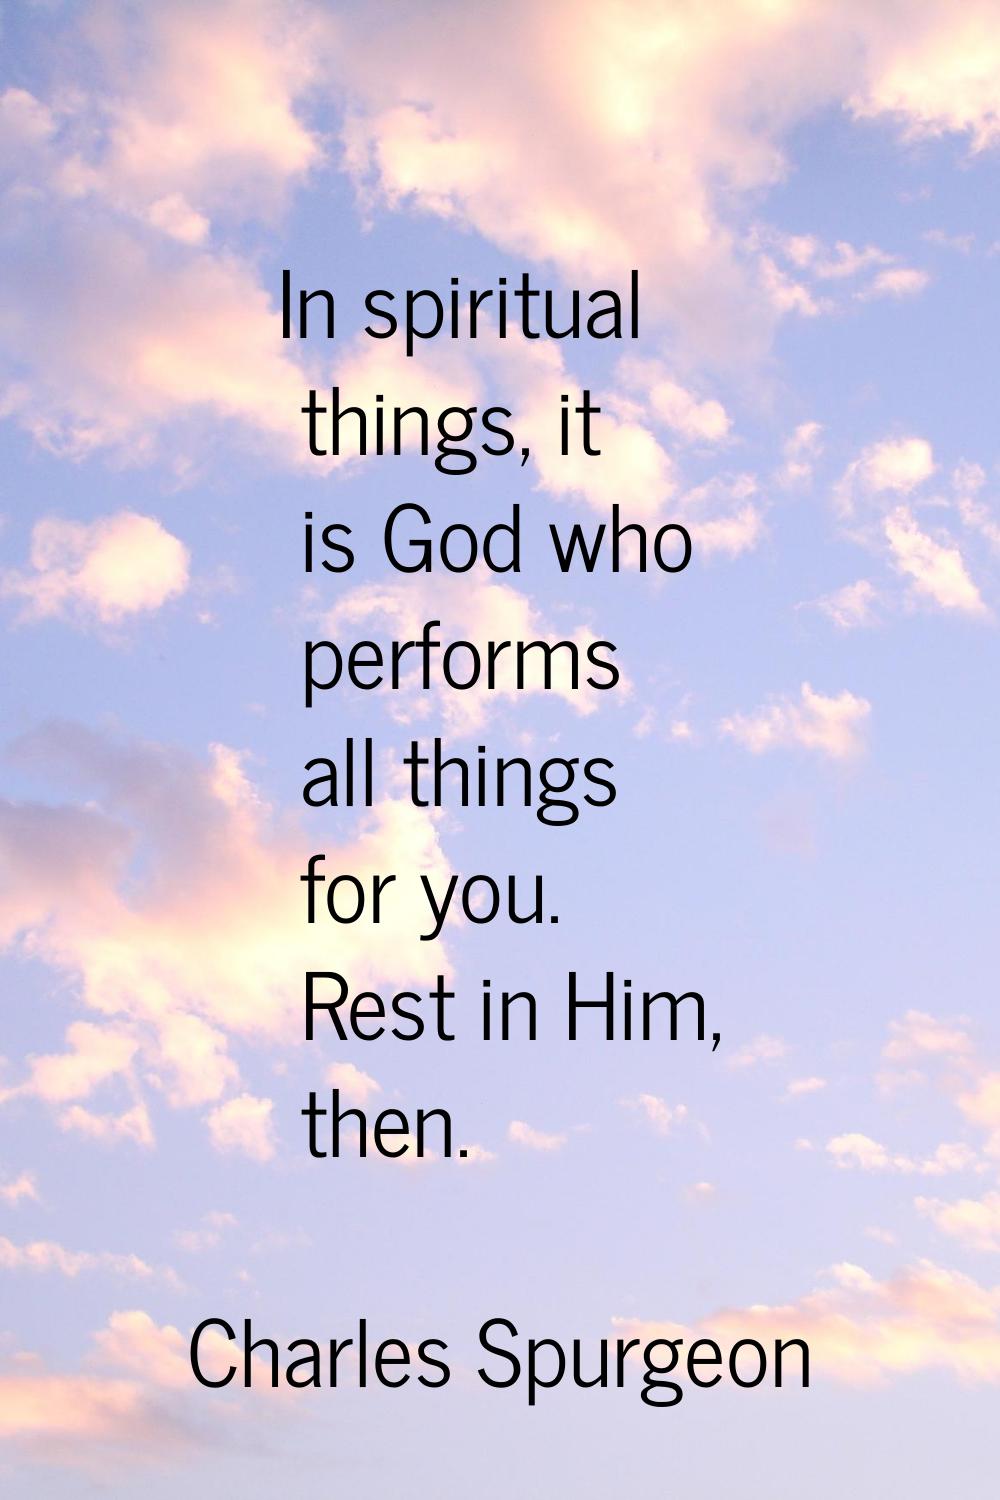 In spiritual things, it is God who performs all things for you. Rest in Him, then.